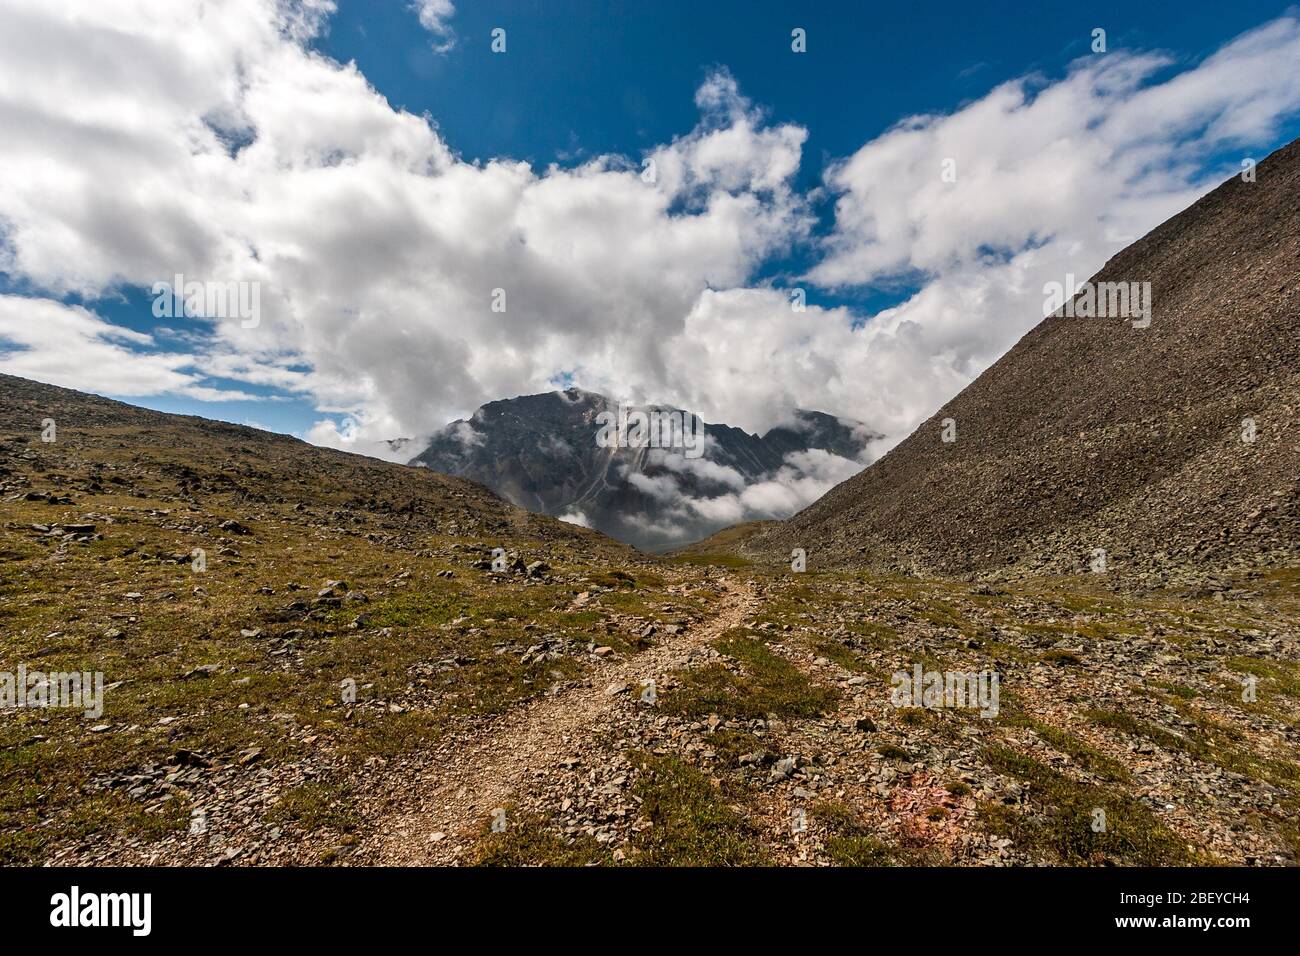 A Rocky Path Between The Mountains Leads To A High Mountain Surrounded By Clouds Lots Of Stones On The Ground Blue Sky And Low Clouds Horizontal Stock Photo Alamy